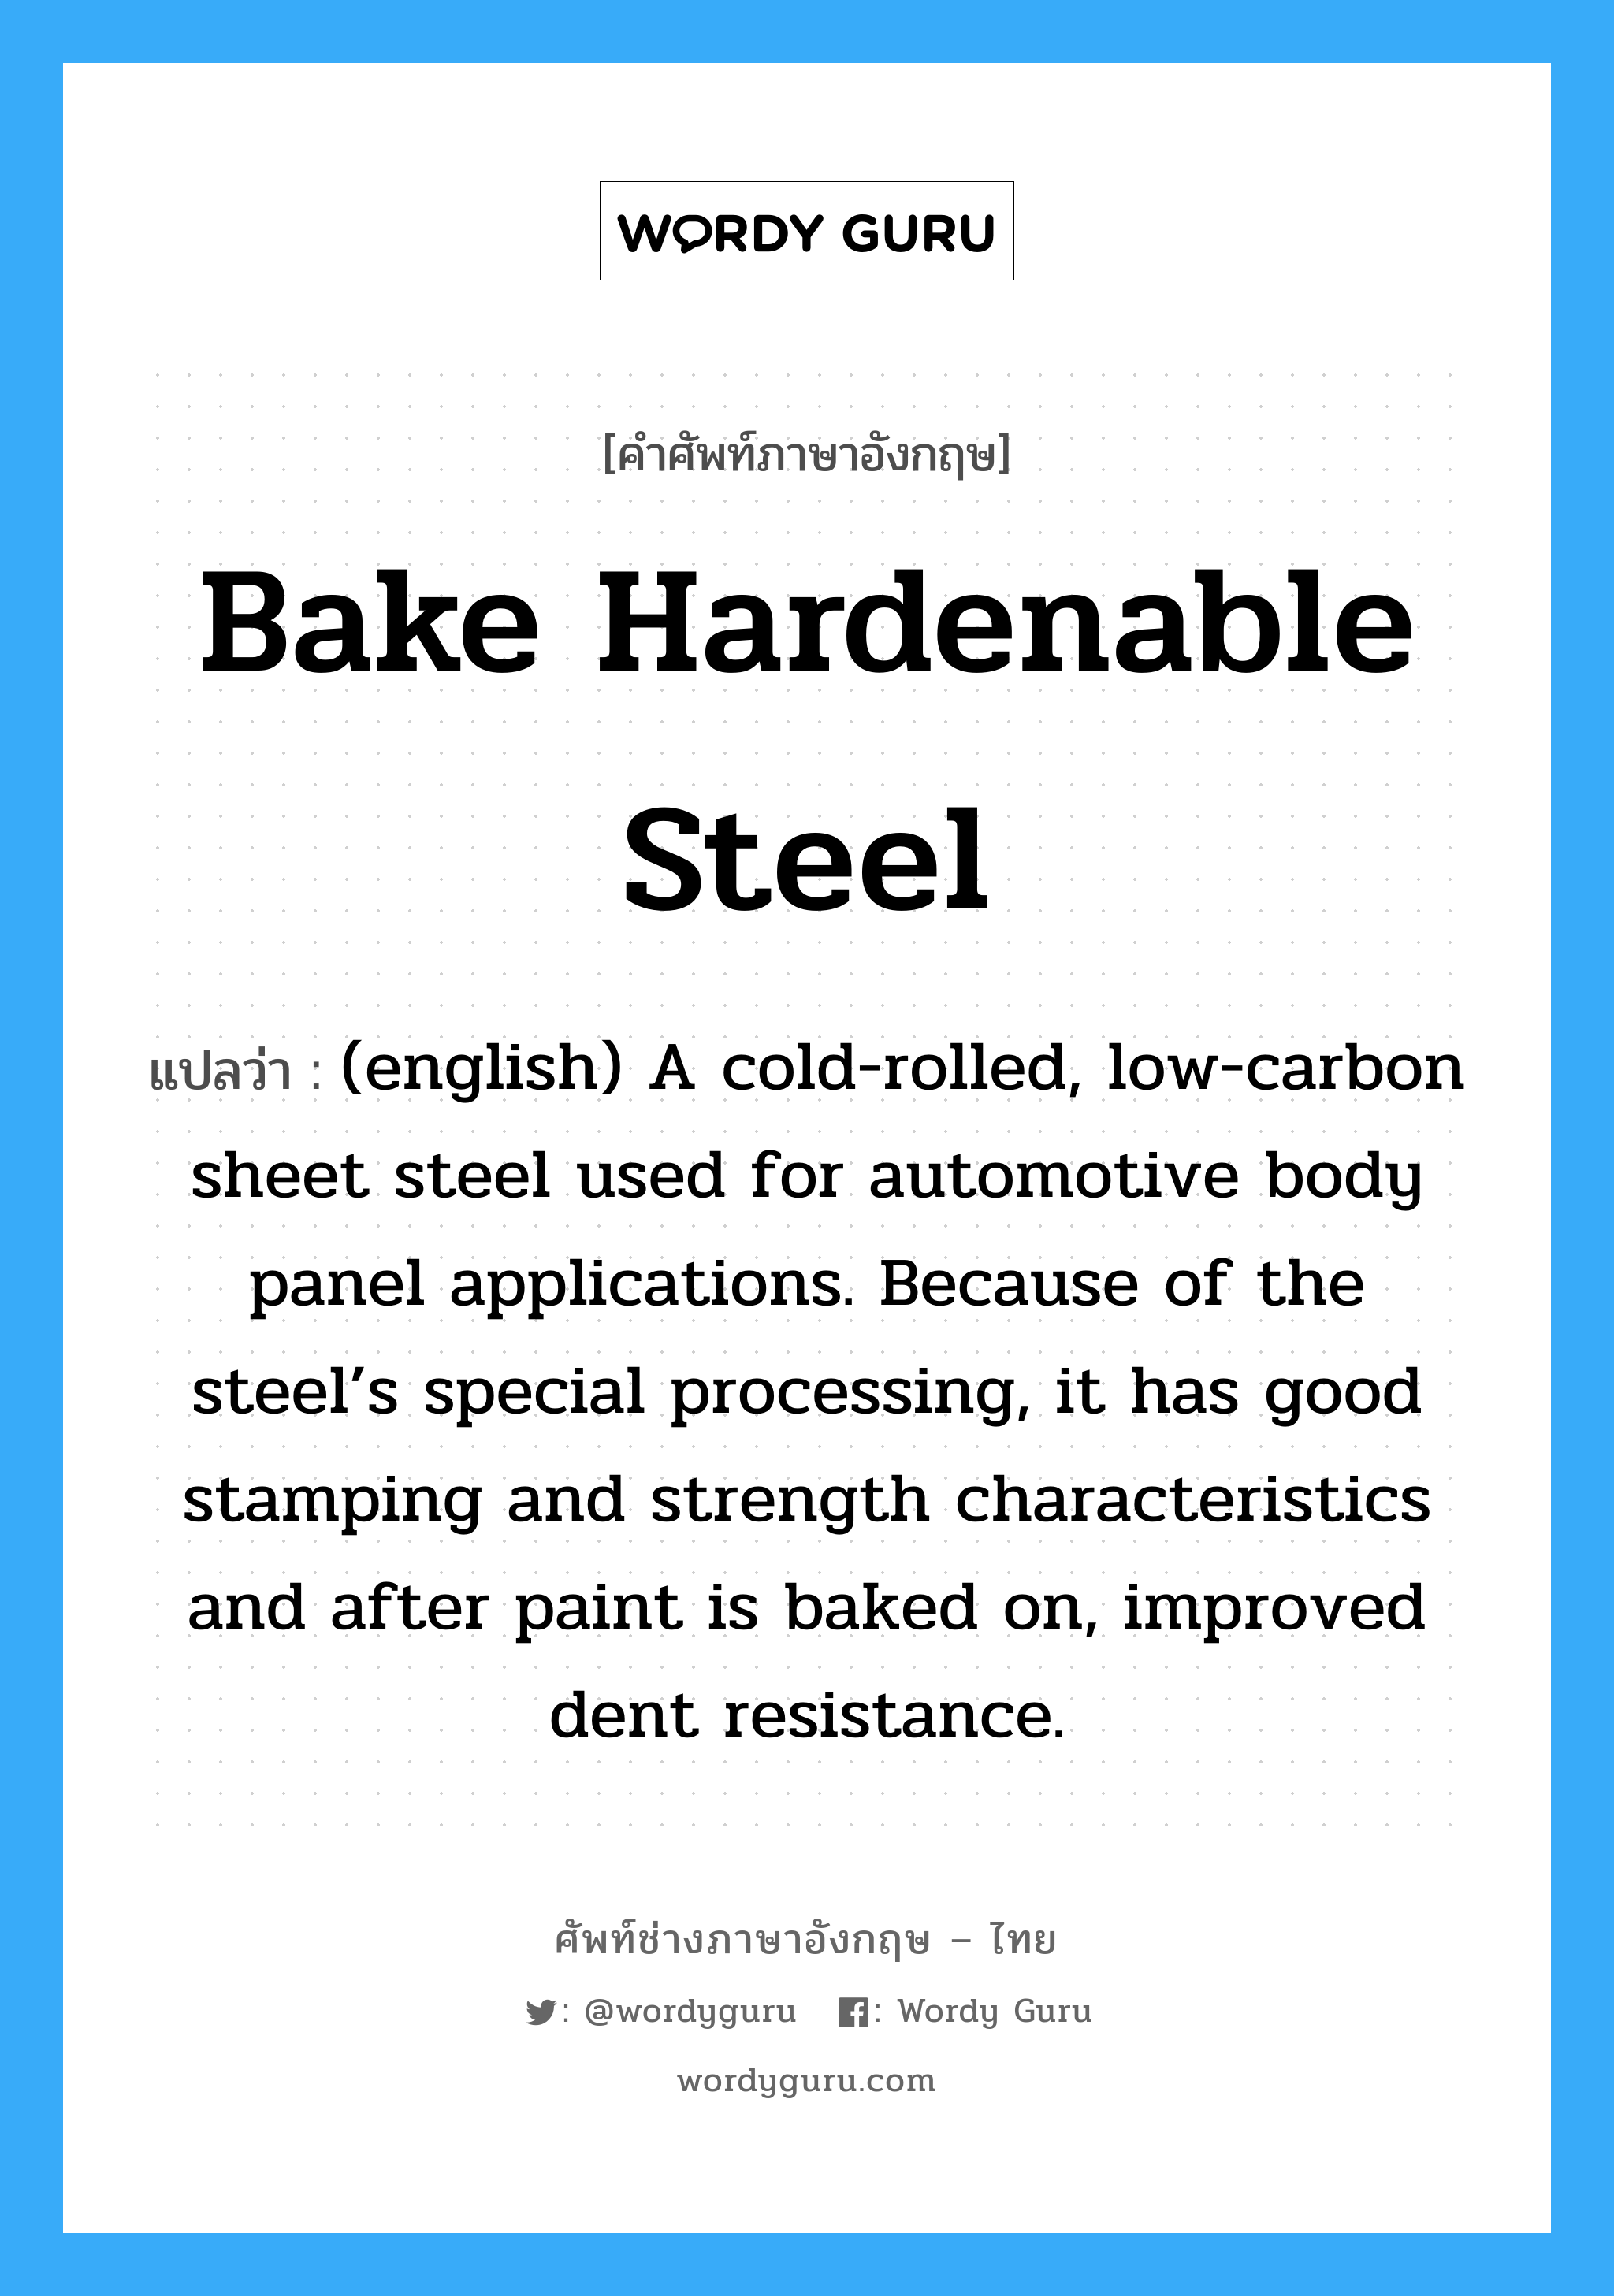 Bake Hardenable Steel แปลว่า?, คำศัพท์ช่างภาษาอังกฤษ - ไทย Bake Hardenable Steel คำศัพท์ภาษาอังกฤษ Bake Hardenable Steel แปลว่า (english) A cold-rolled, low-carbon sheet steel used for automotive body panel applications. Because of the steel’s special processing, it has good stamping and strength characteristics and after paint is baked on, improved dent resistance.